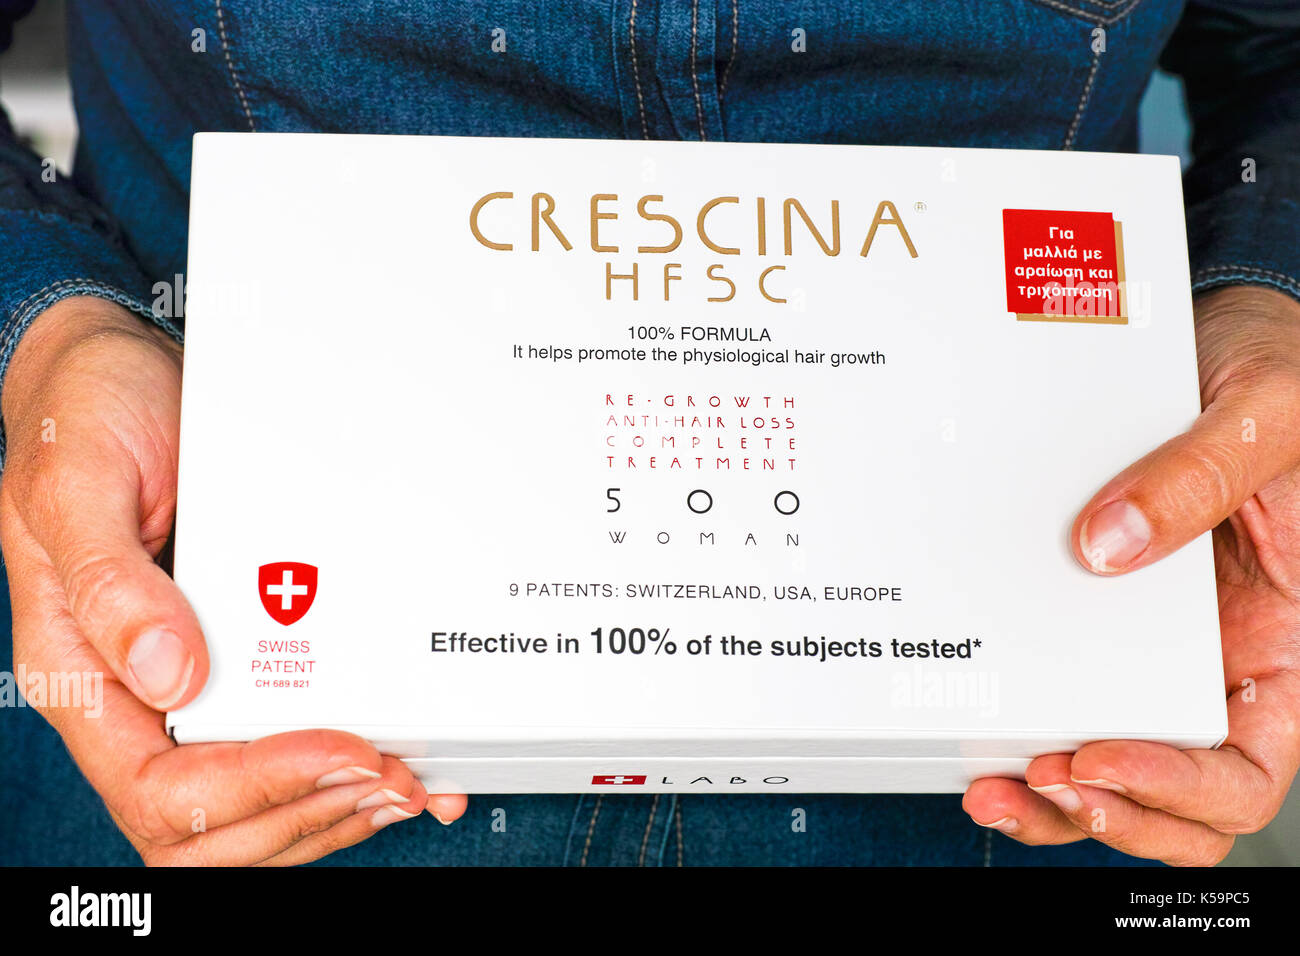 Paphos, Cyprus - November 13, 2015 Woman hands with Crescina HFSC Re-Growth Anti-Hair Loss Complete Treatment box. Crescina HFSC preserves cell longev Stock Photo